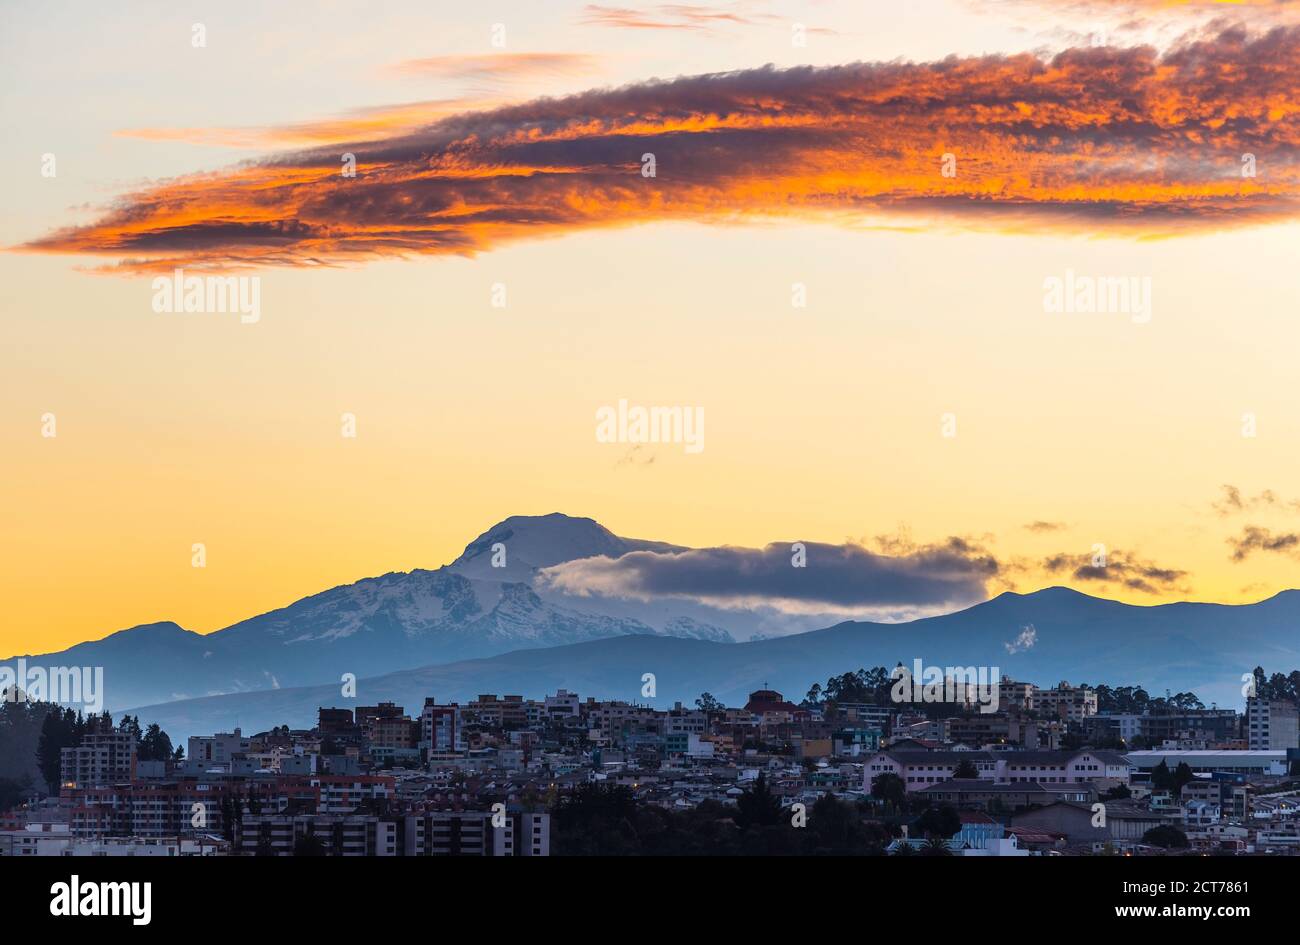 The Cayambe volcano at sunrise with an aerial cityscape of Quito, Andes Mountains, Ecuador. Stock Photo